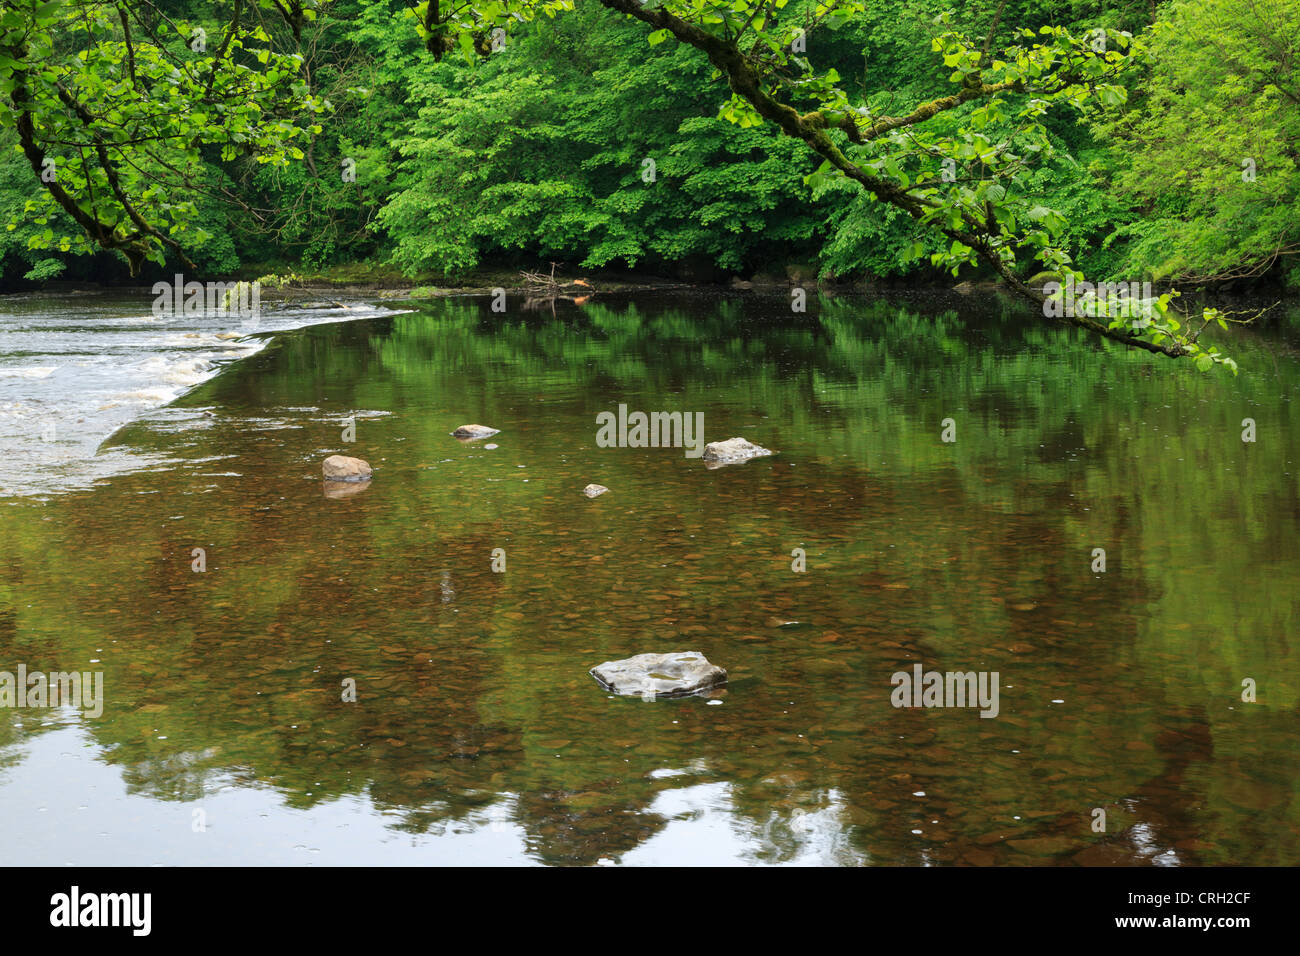 Still waters of the River Ure above Aysgarth Falls, Yorkshire Stock Photo